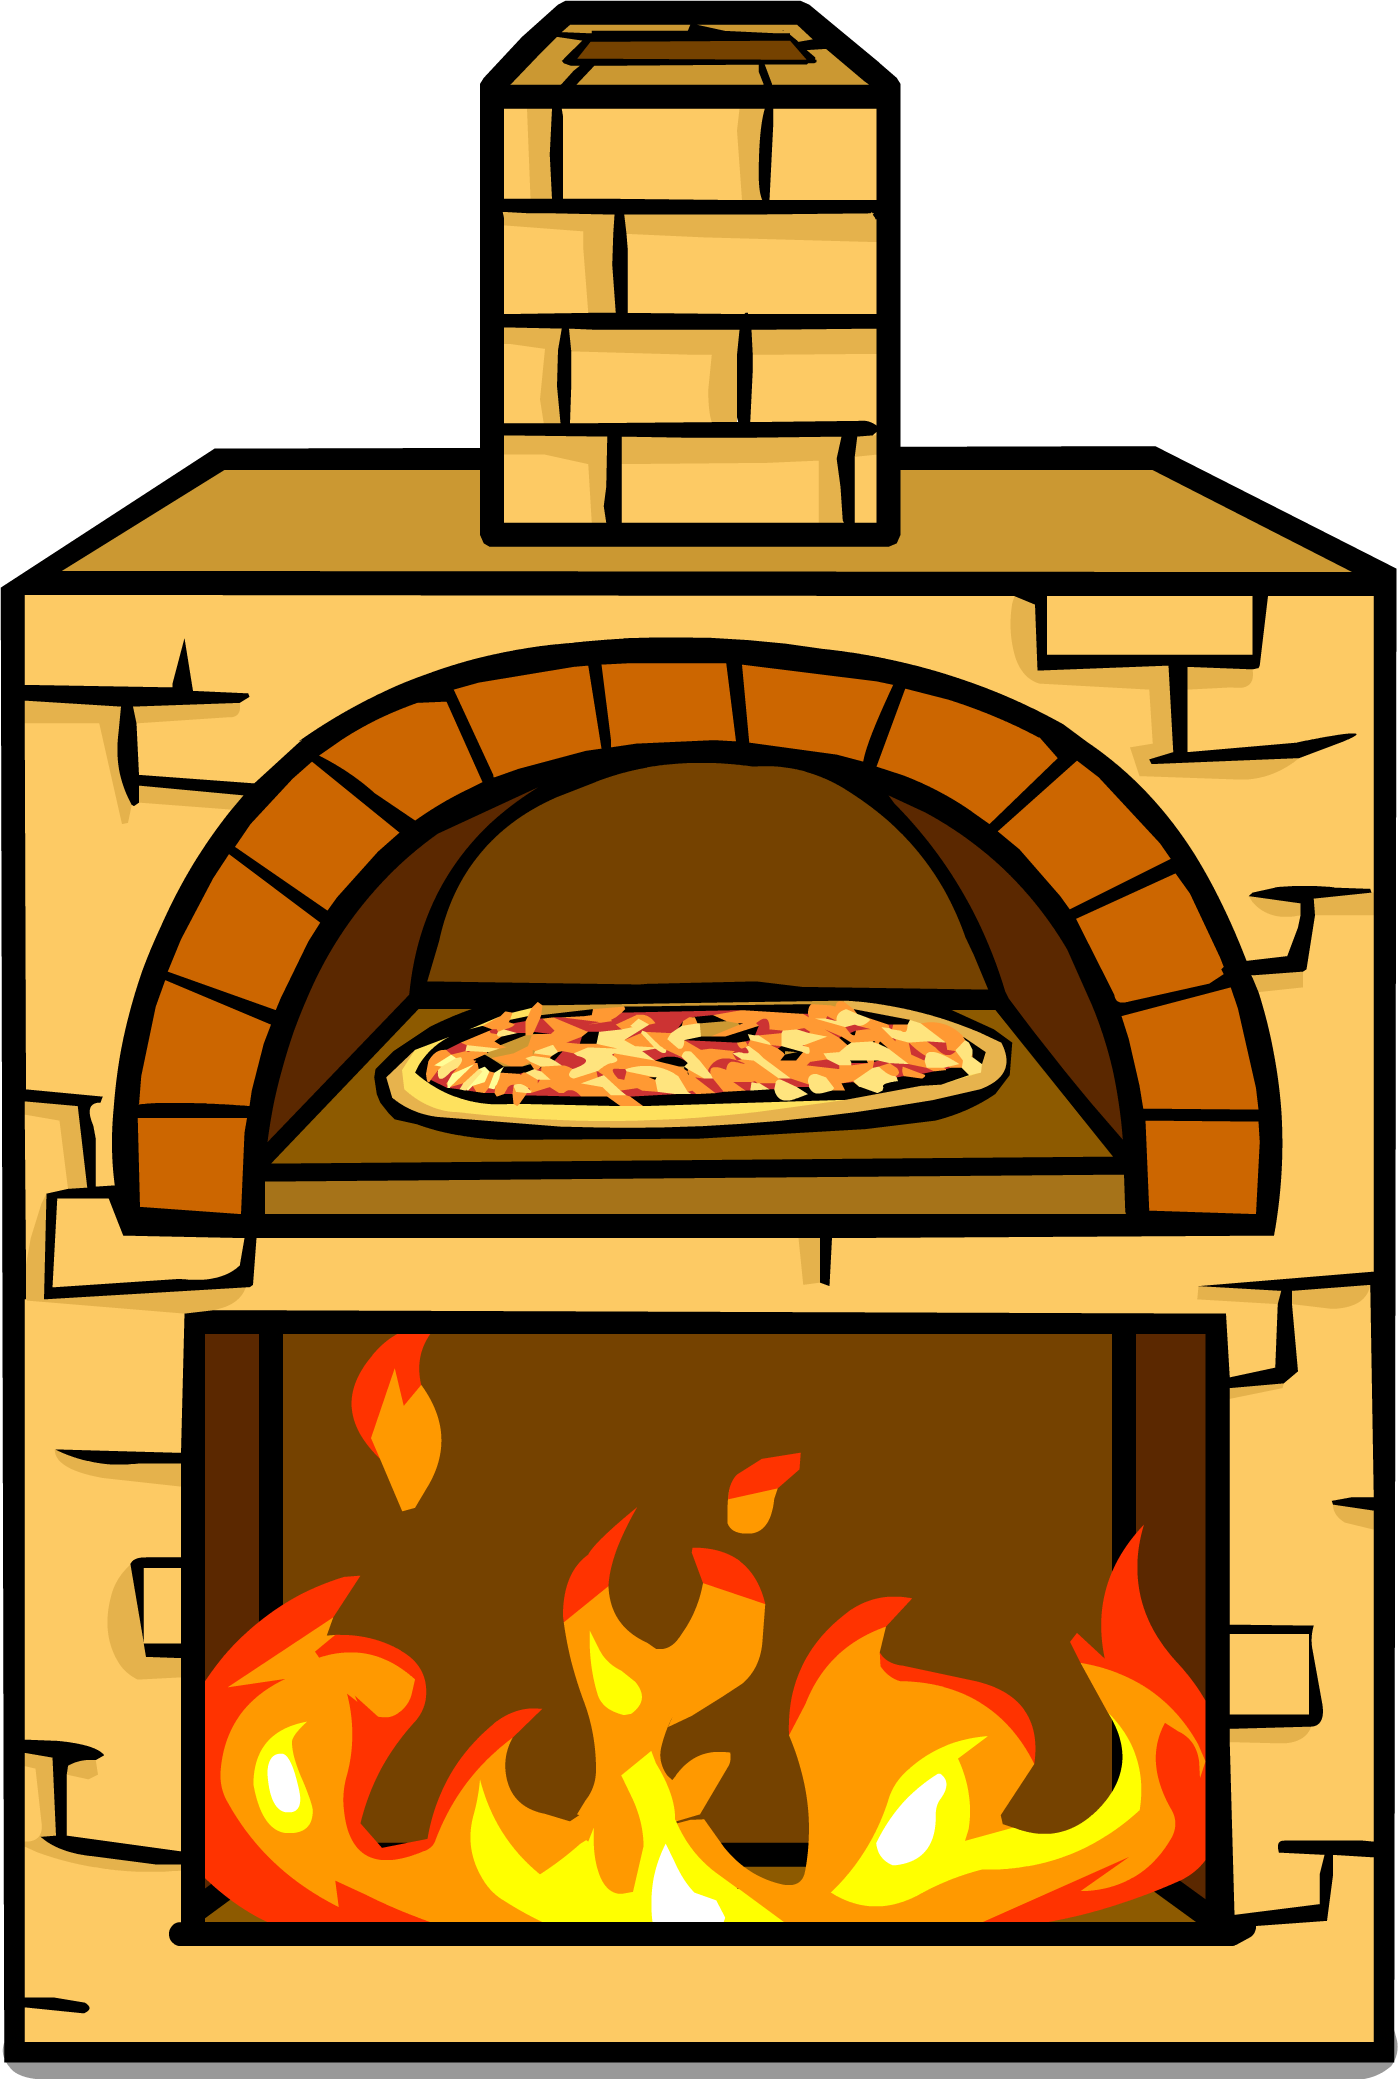 Image - Pizza Oven Png (1398x2079)